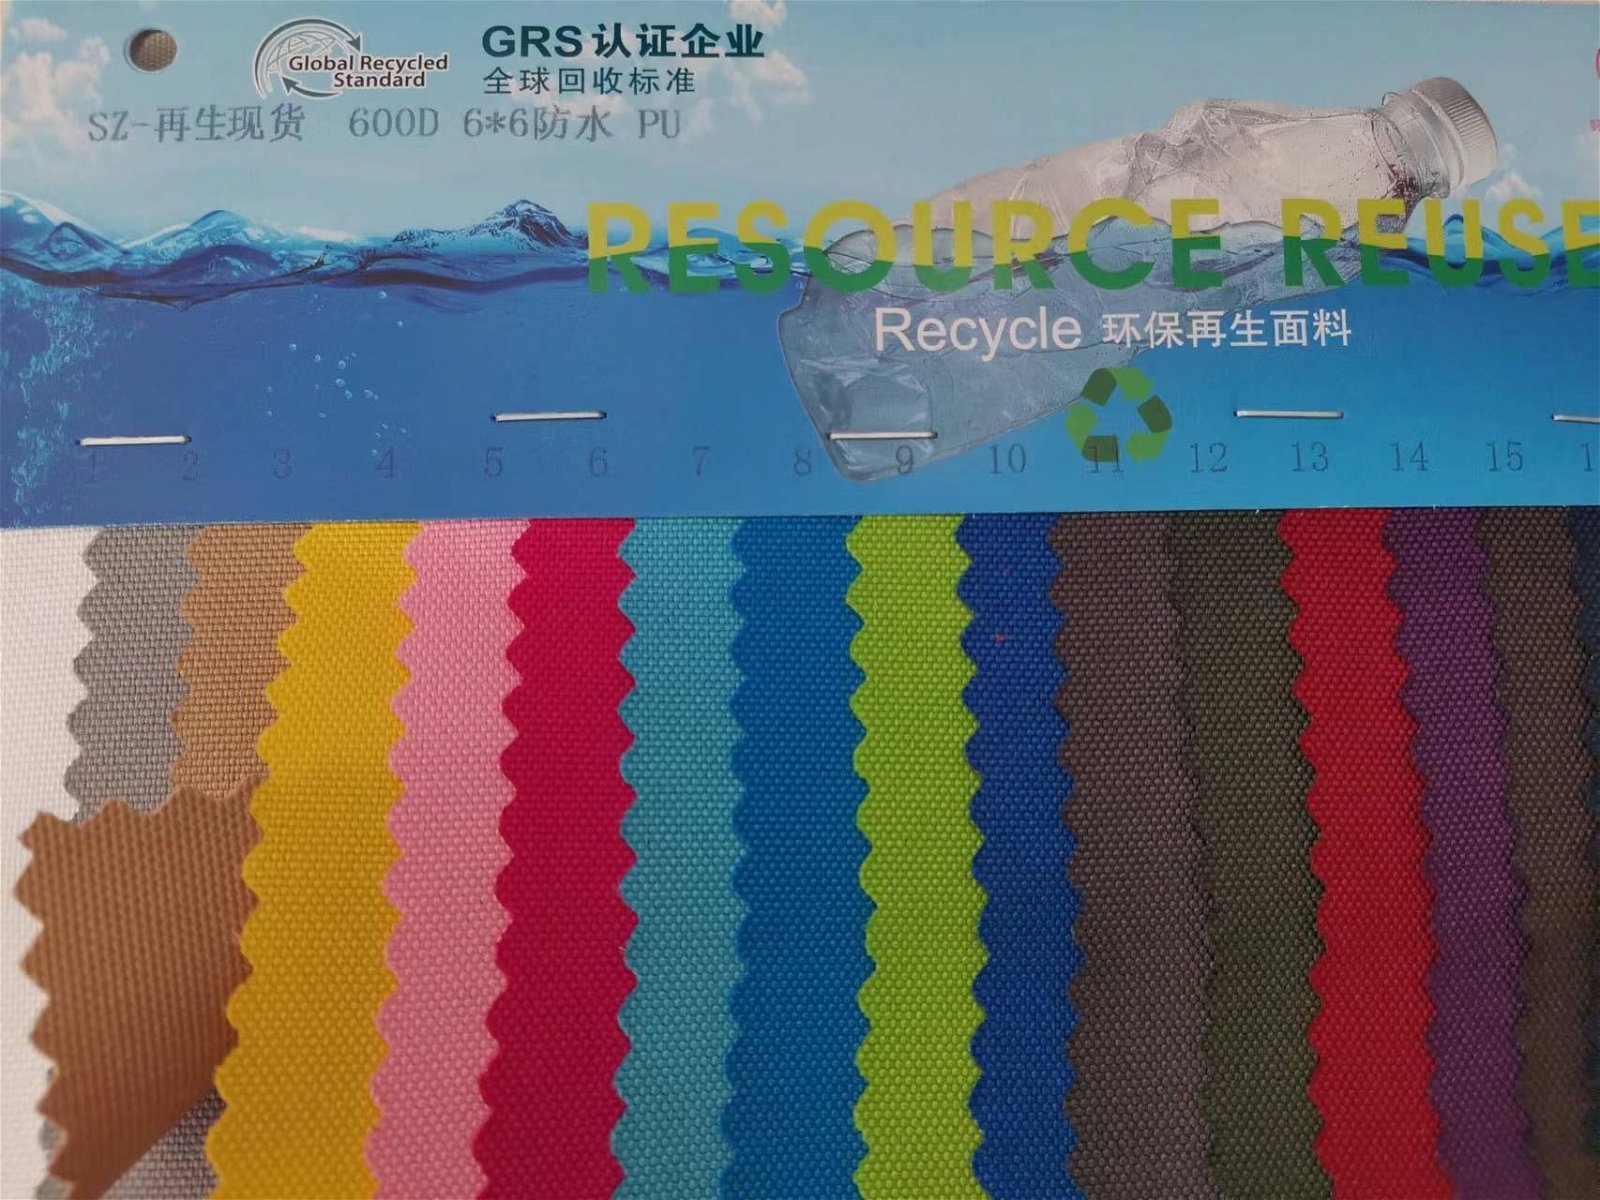 In Stock 600d Eco-friendly GRS recycled polyester 100% RPET 210D 300D 600D 900D  3